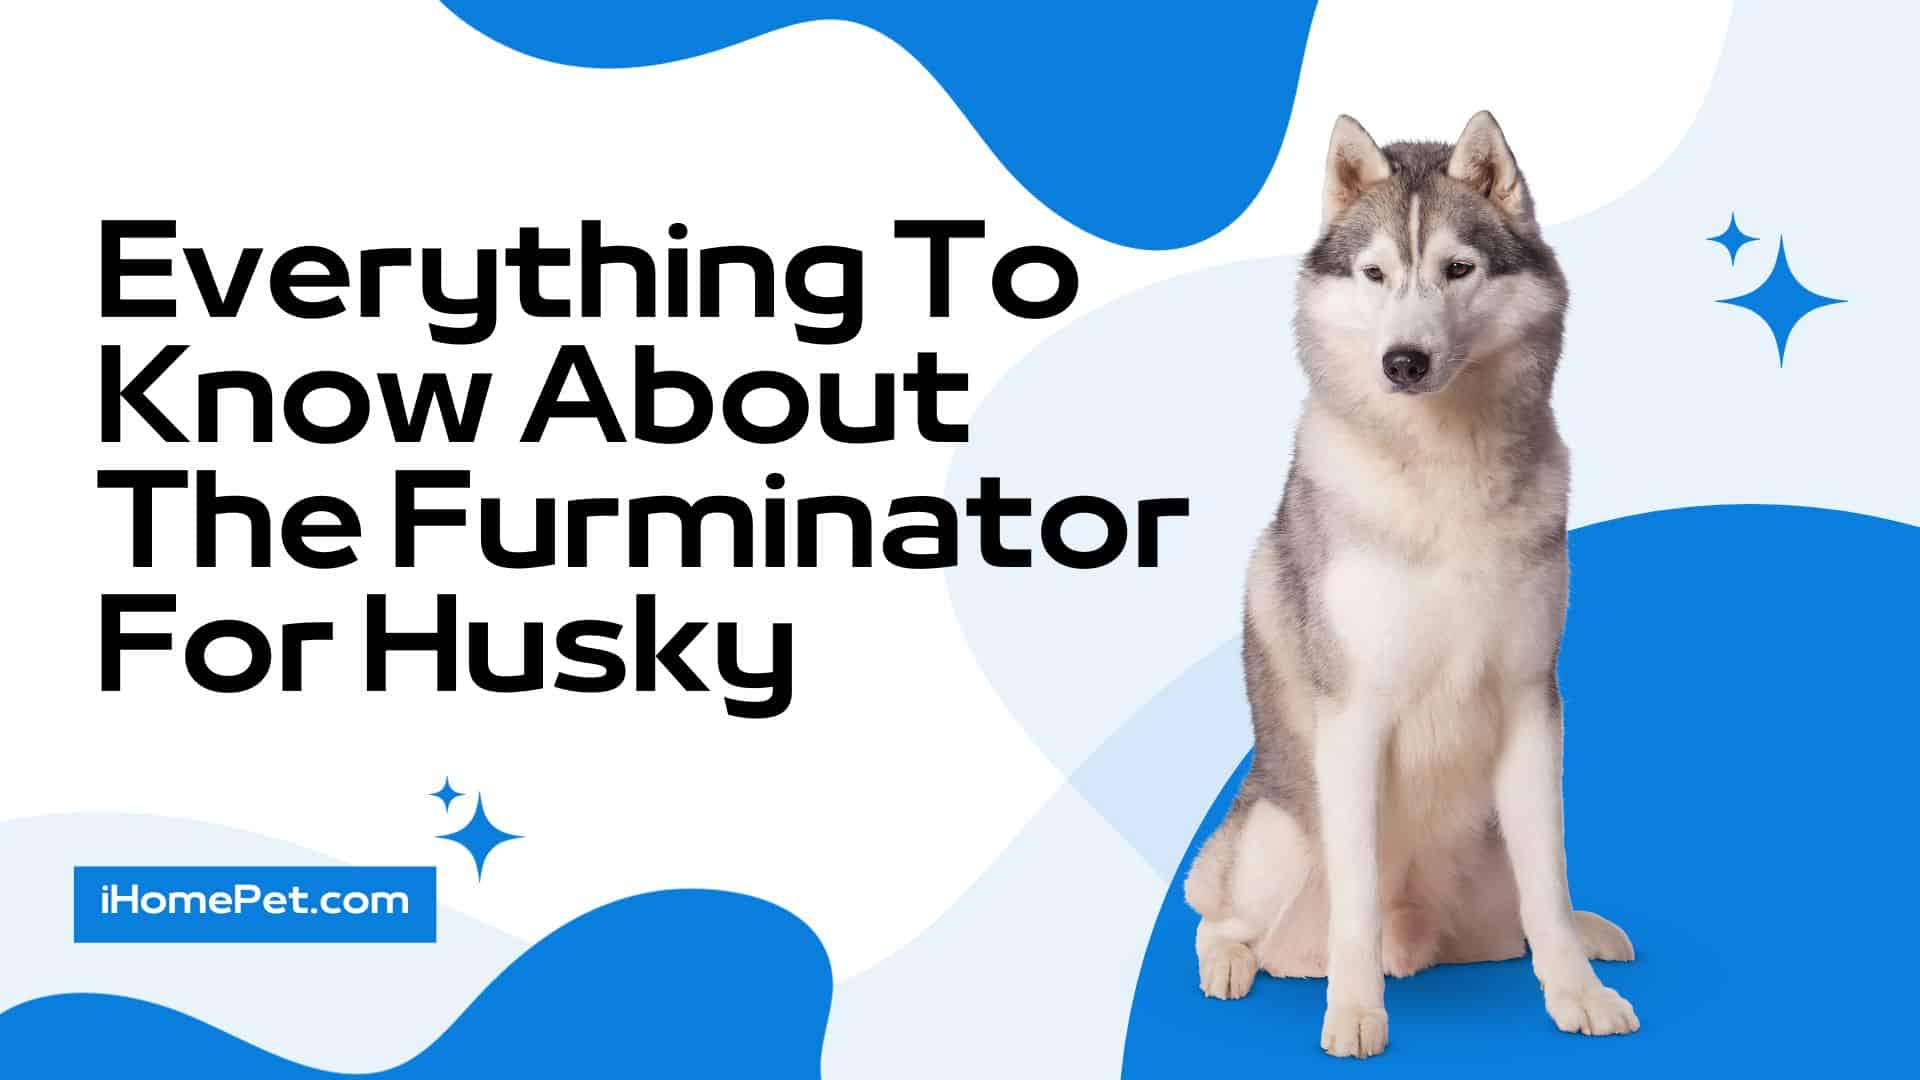 Use a furminator to remove any loose hair from your Husky and Deshedding tool for topcoat medium hair